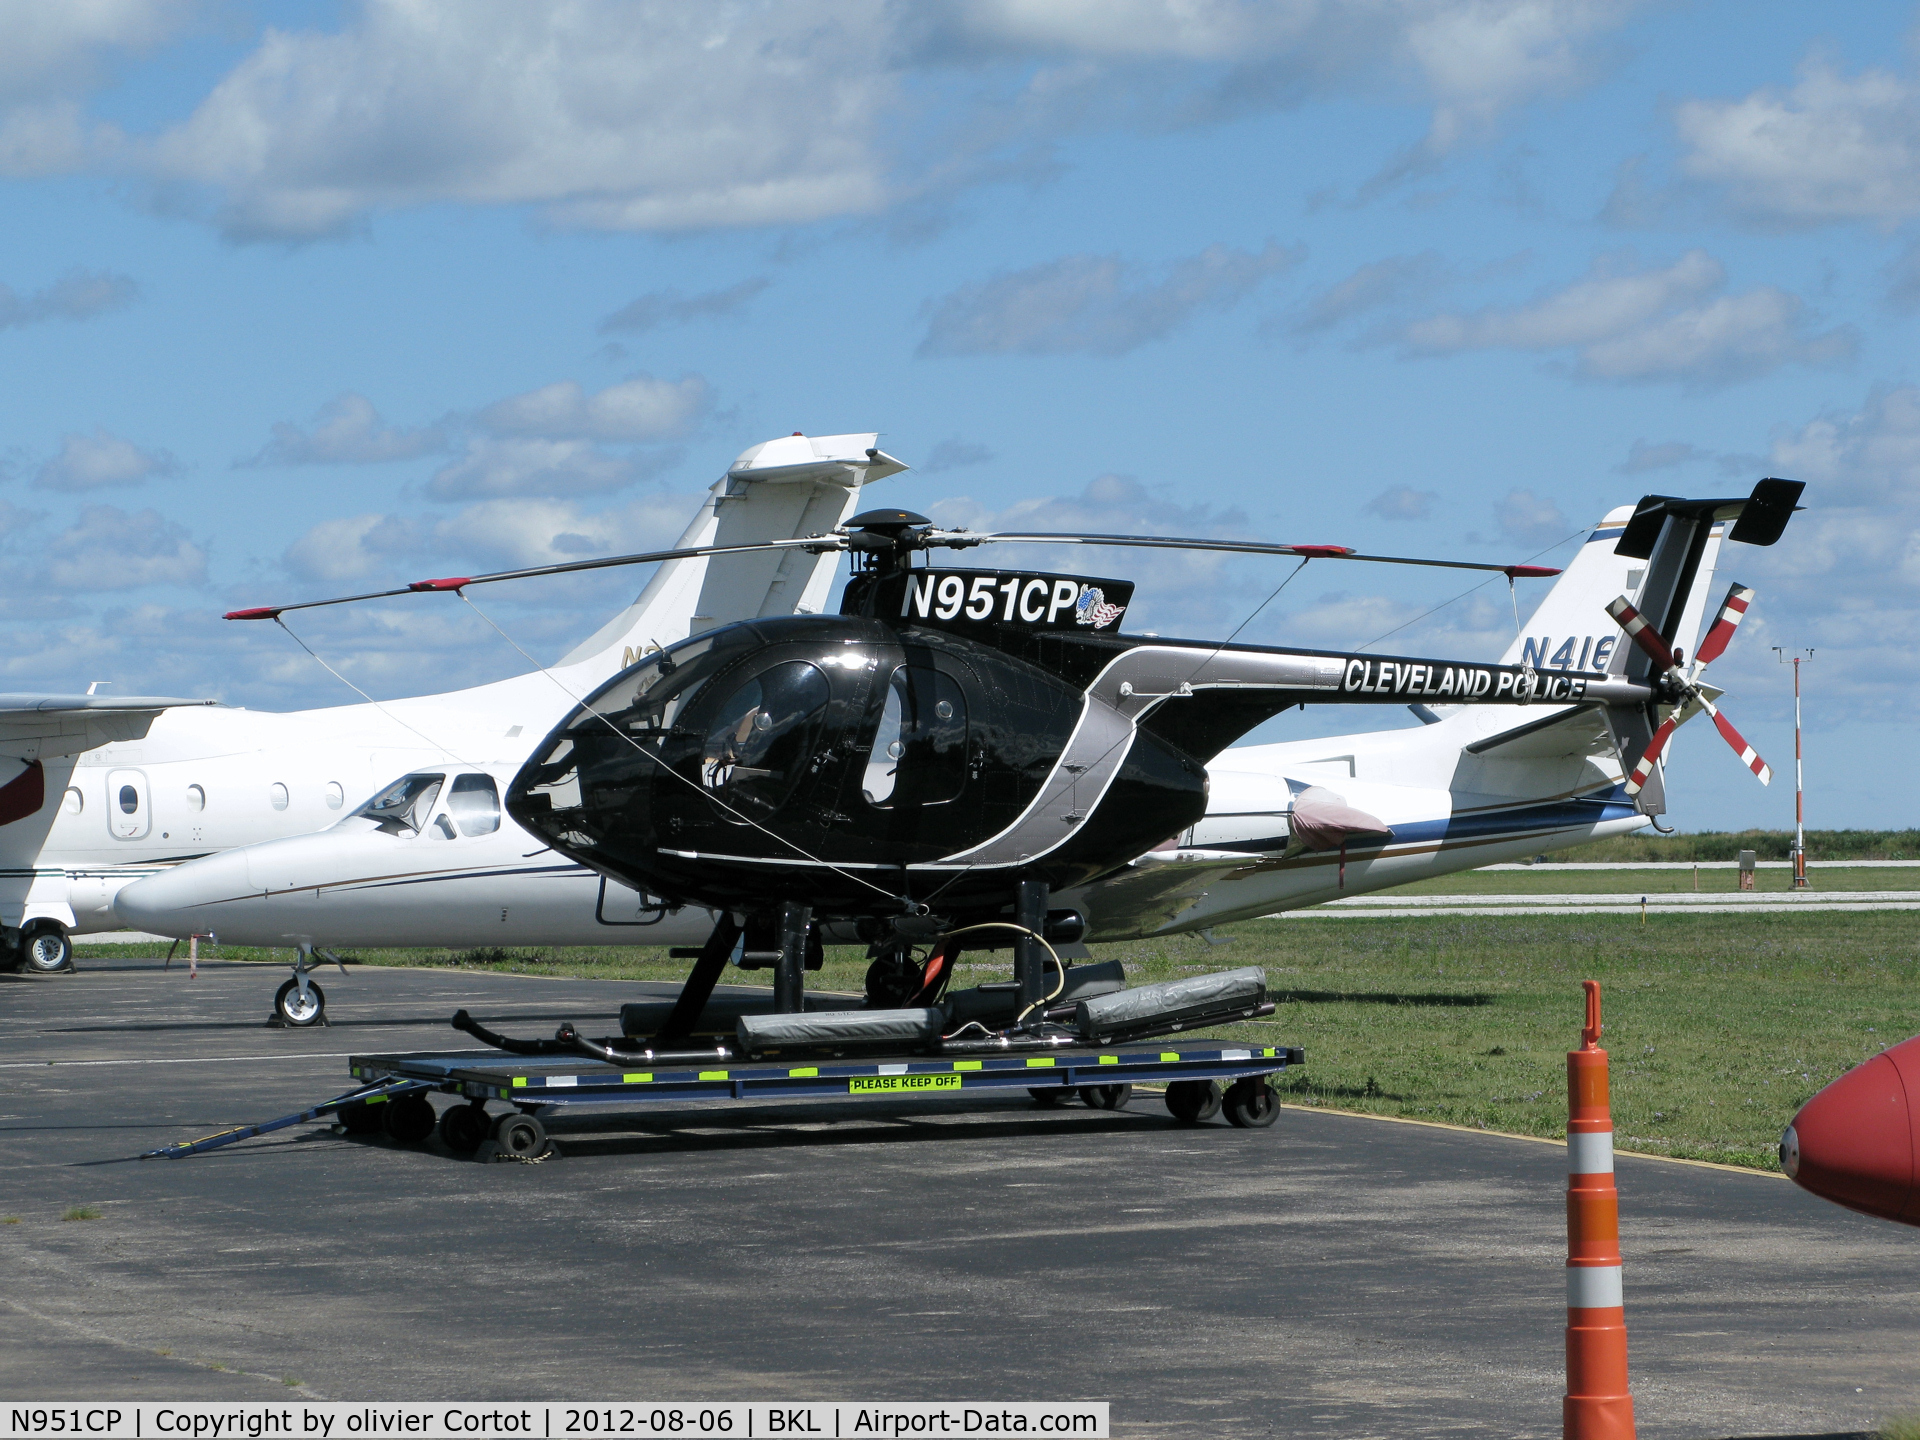 N951CP, 2000 MD Helicopters 369E C/N 0549E, Cleveland PD